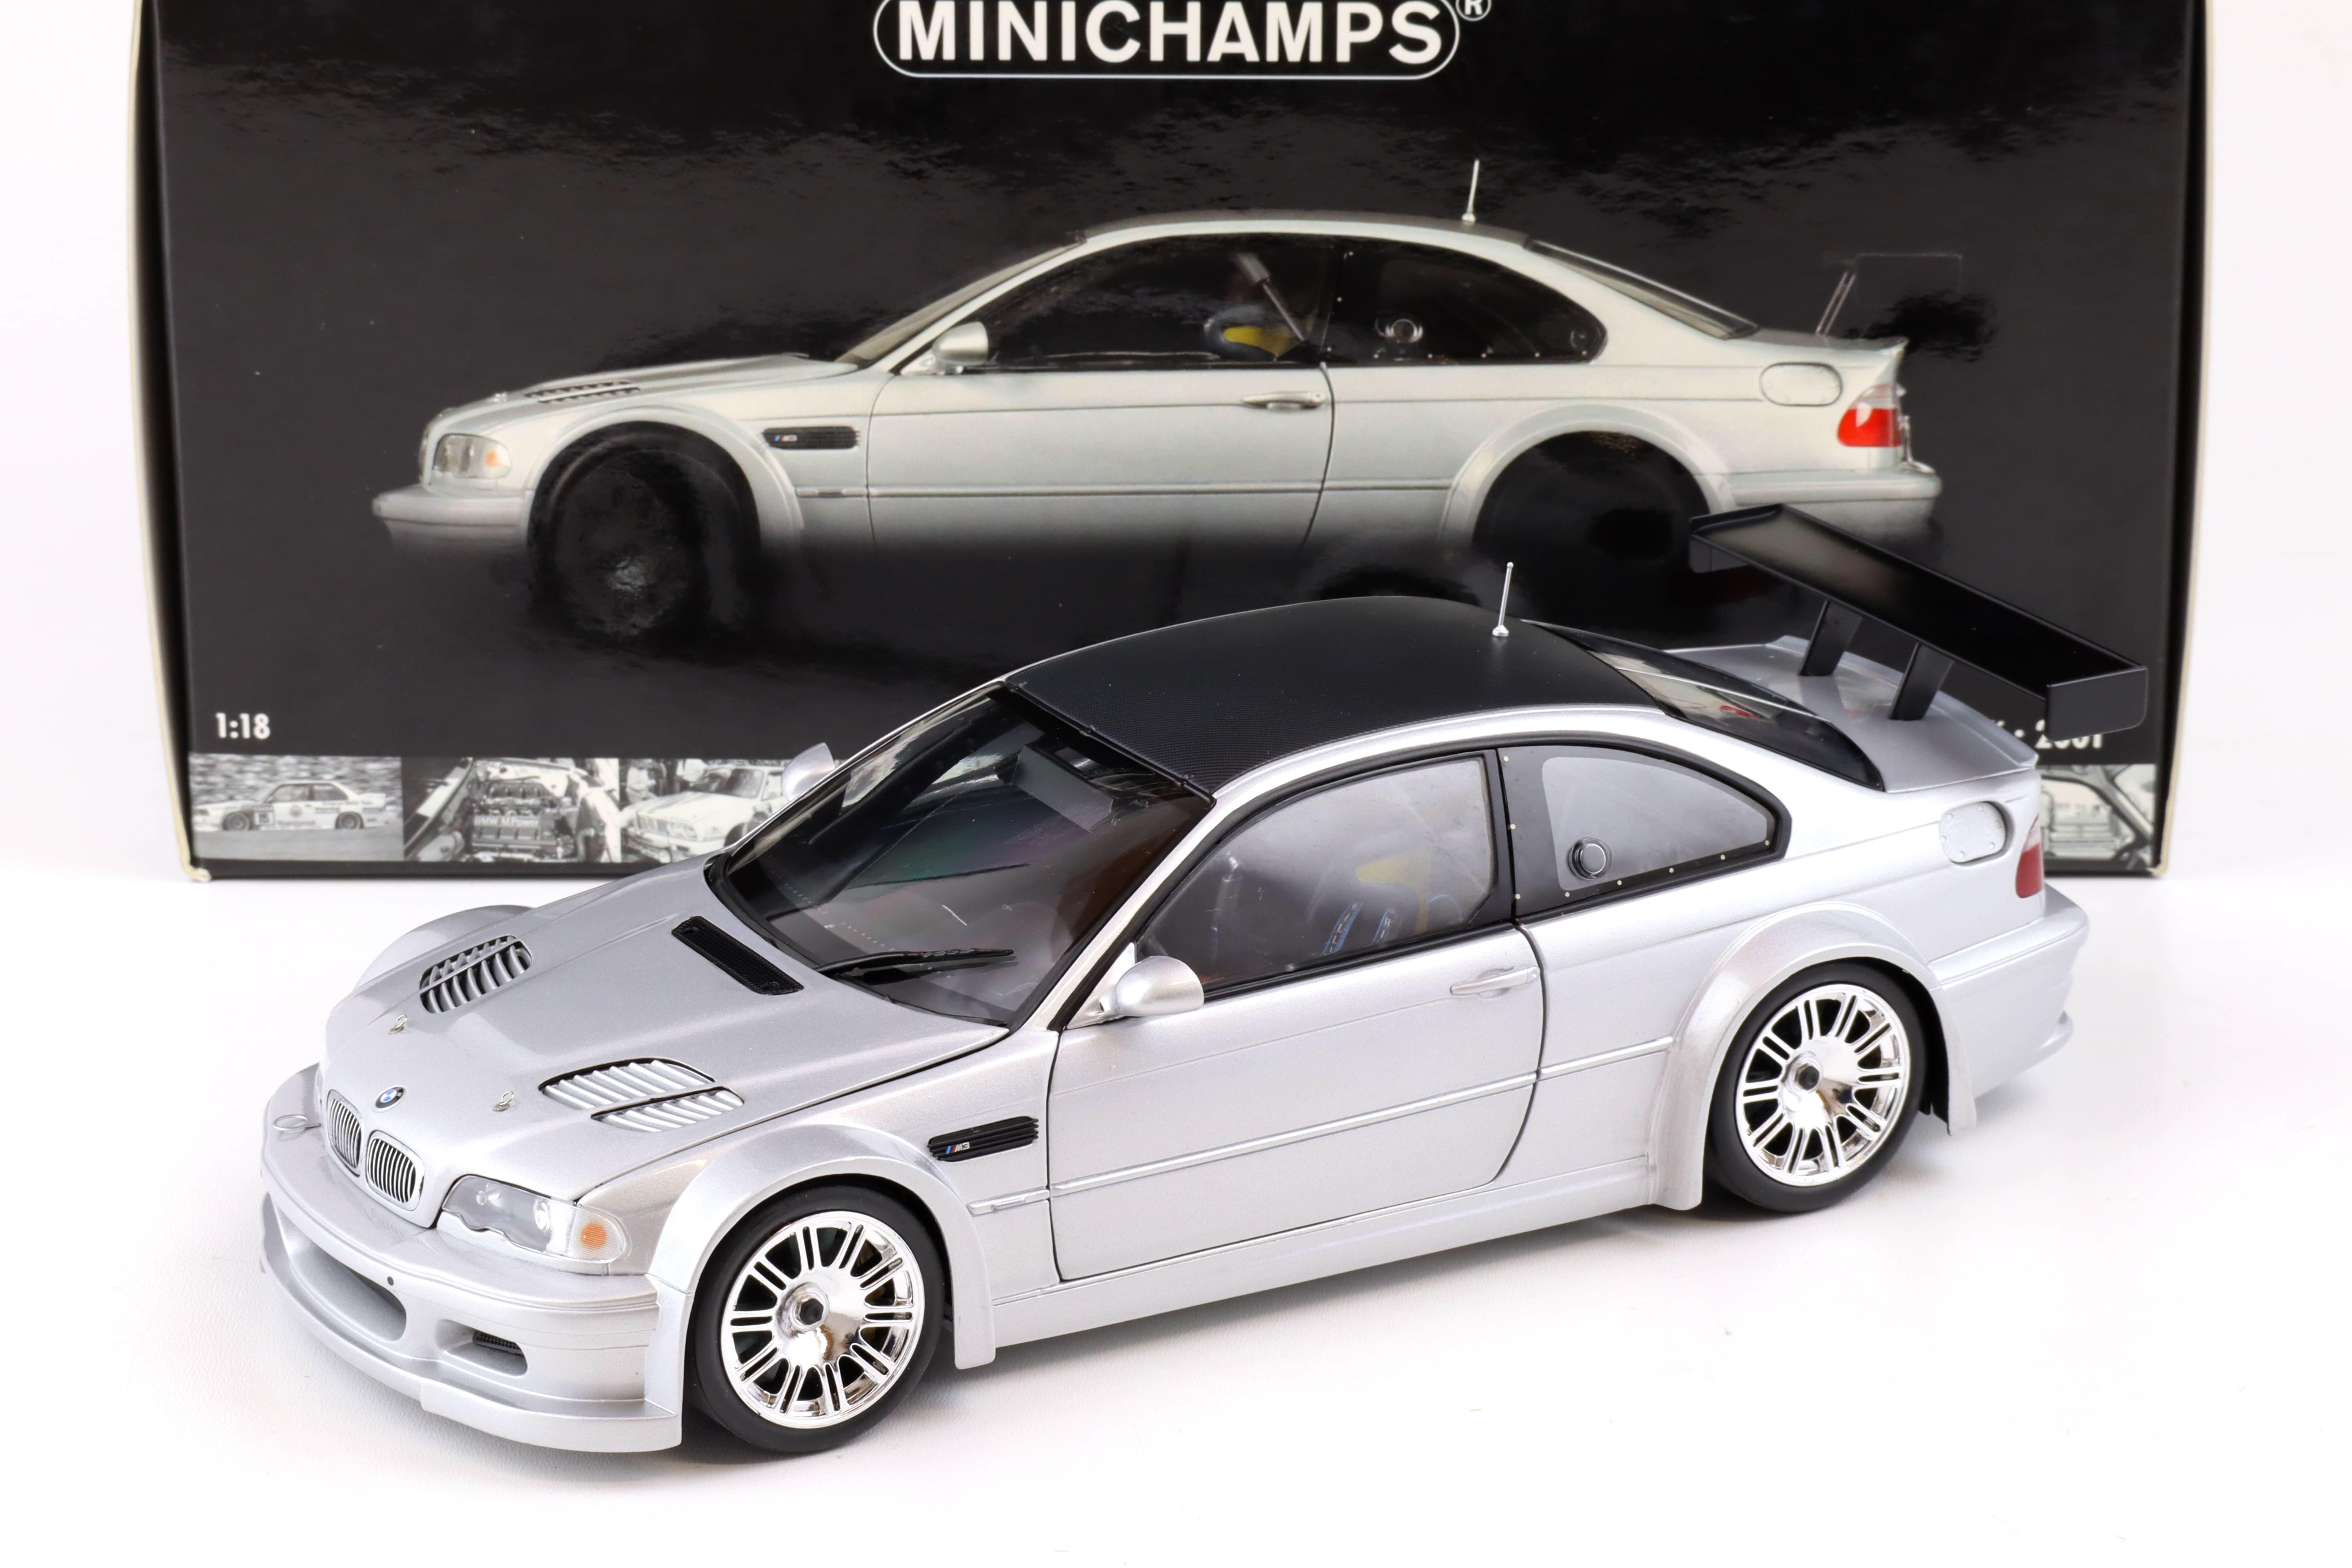 1:18 Minichamps BMW M3 GTR E46 Street 2001 silver with Carbon roof